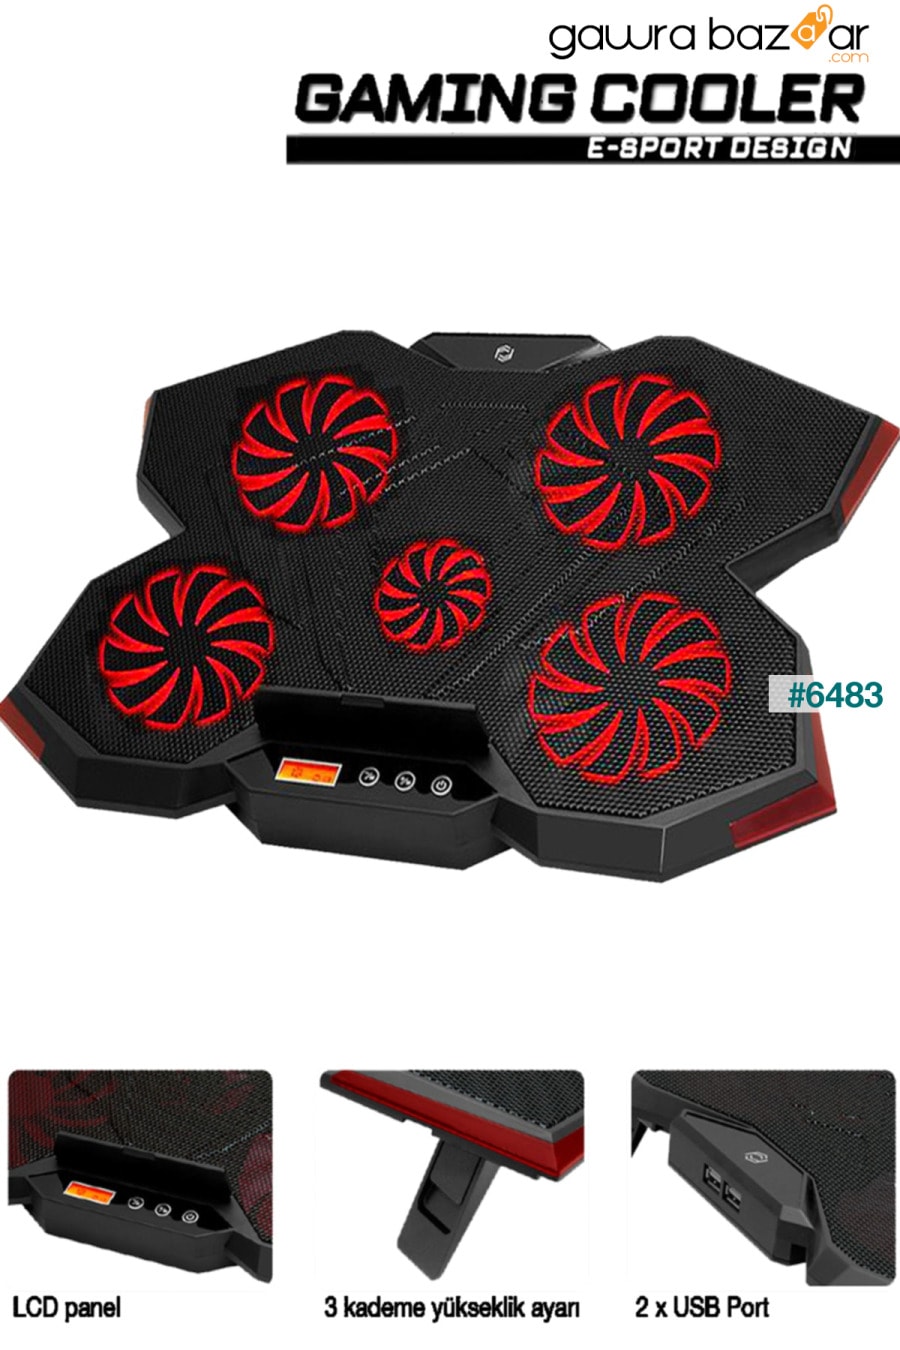 Gp5 E-sport Design 5 Fan Led Lcd Control Panel 15-17 &quot;متوافق مع Pro Stand Notebook Cooler Frisby 0